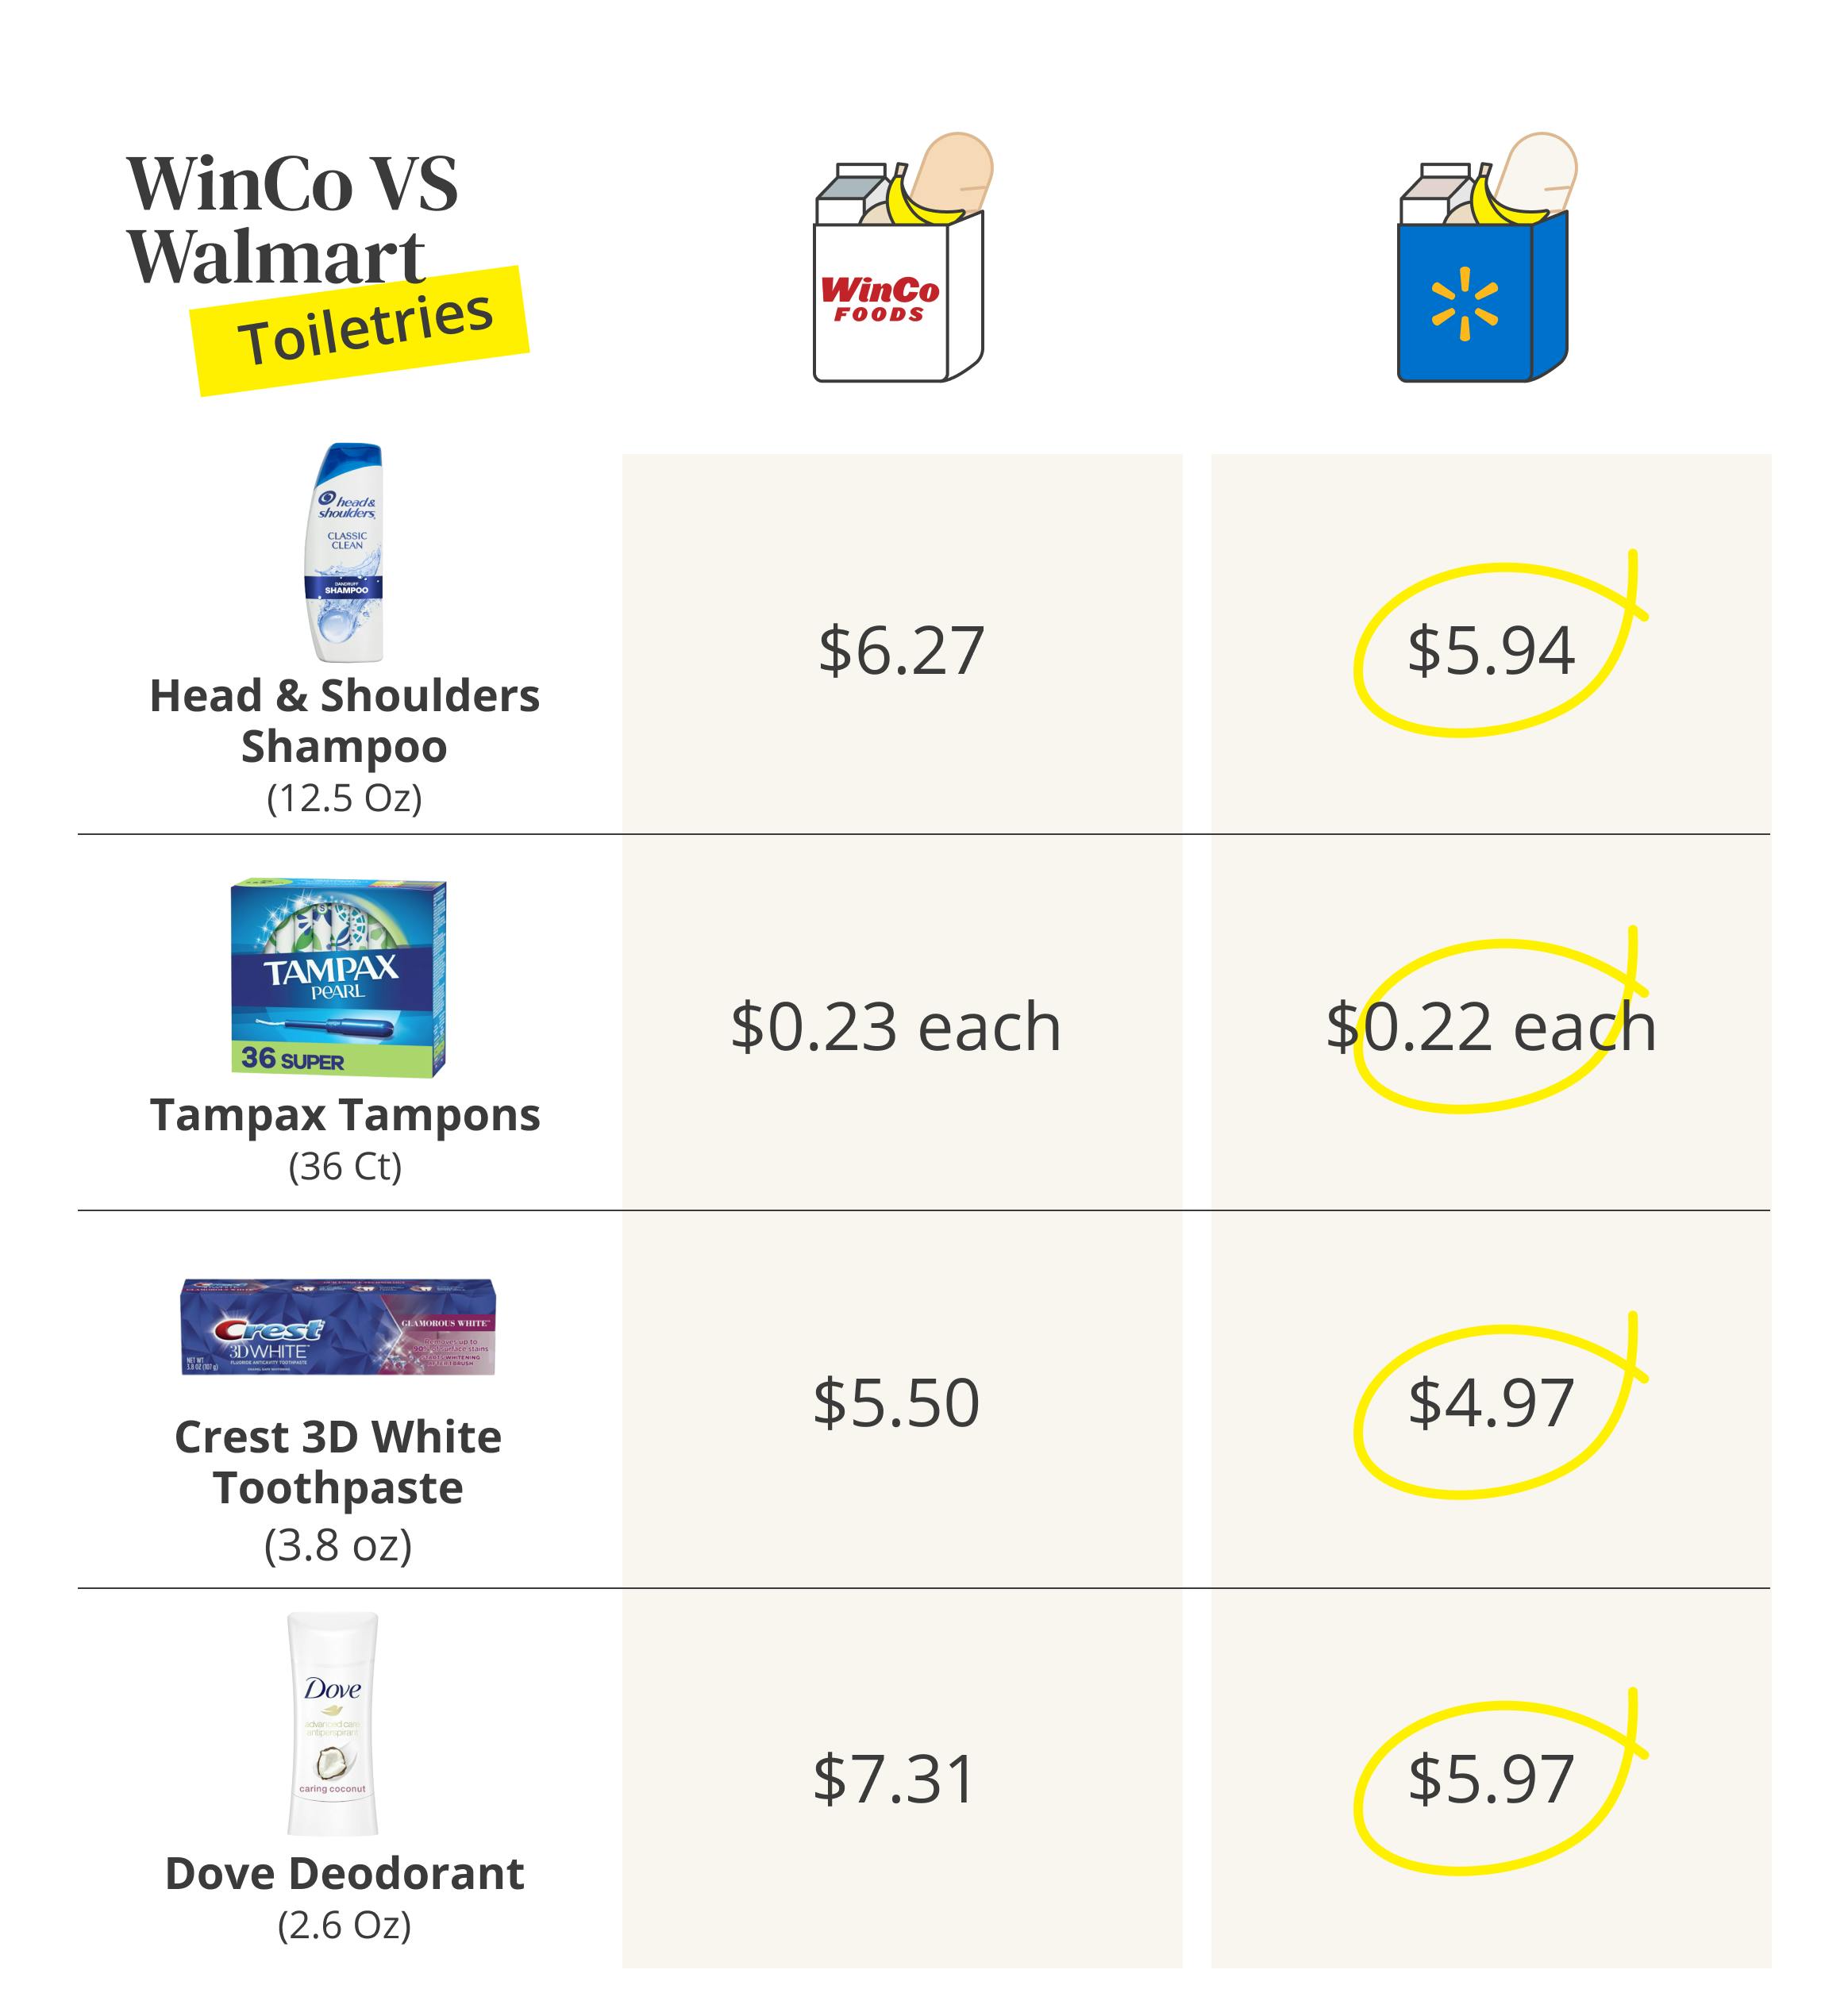 How WinCo prices compare to Walmart prices for toiletries.